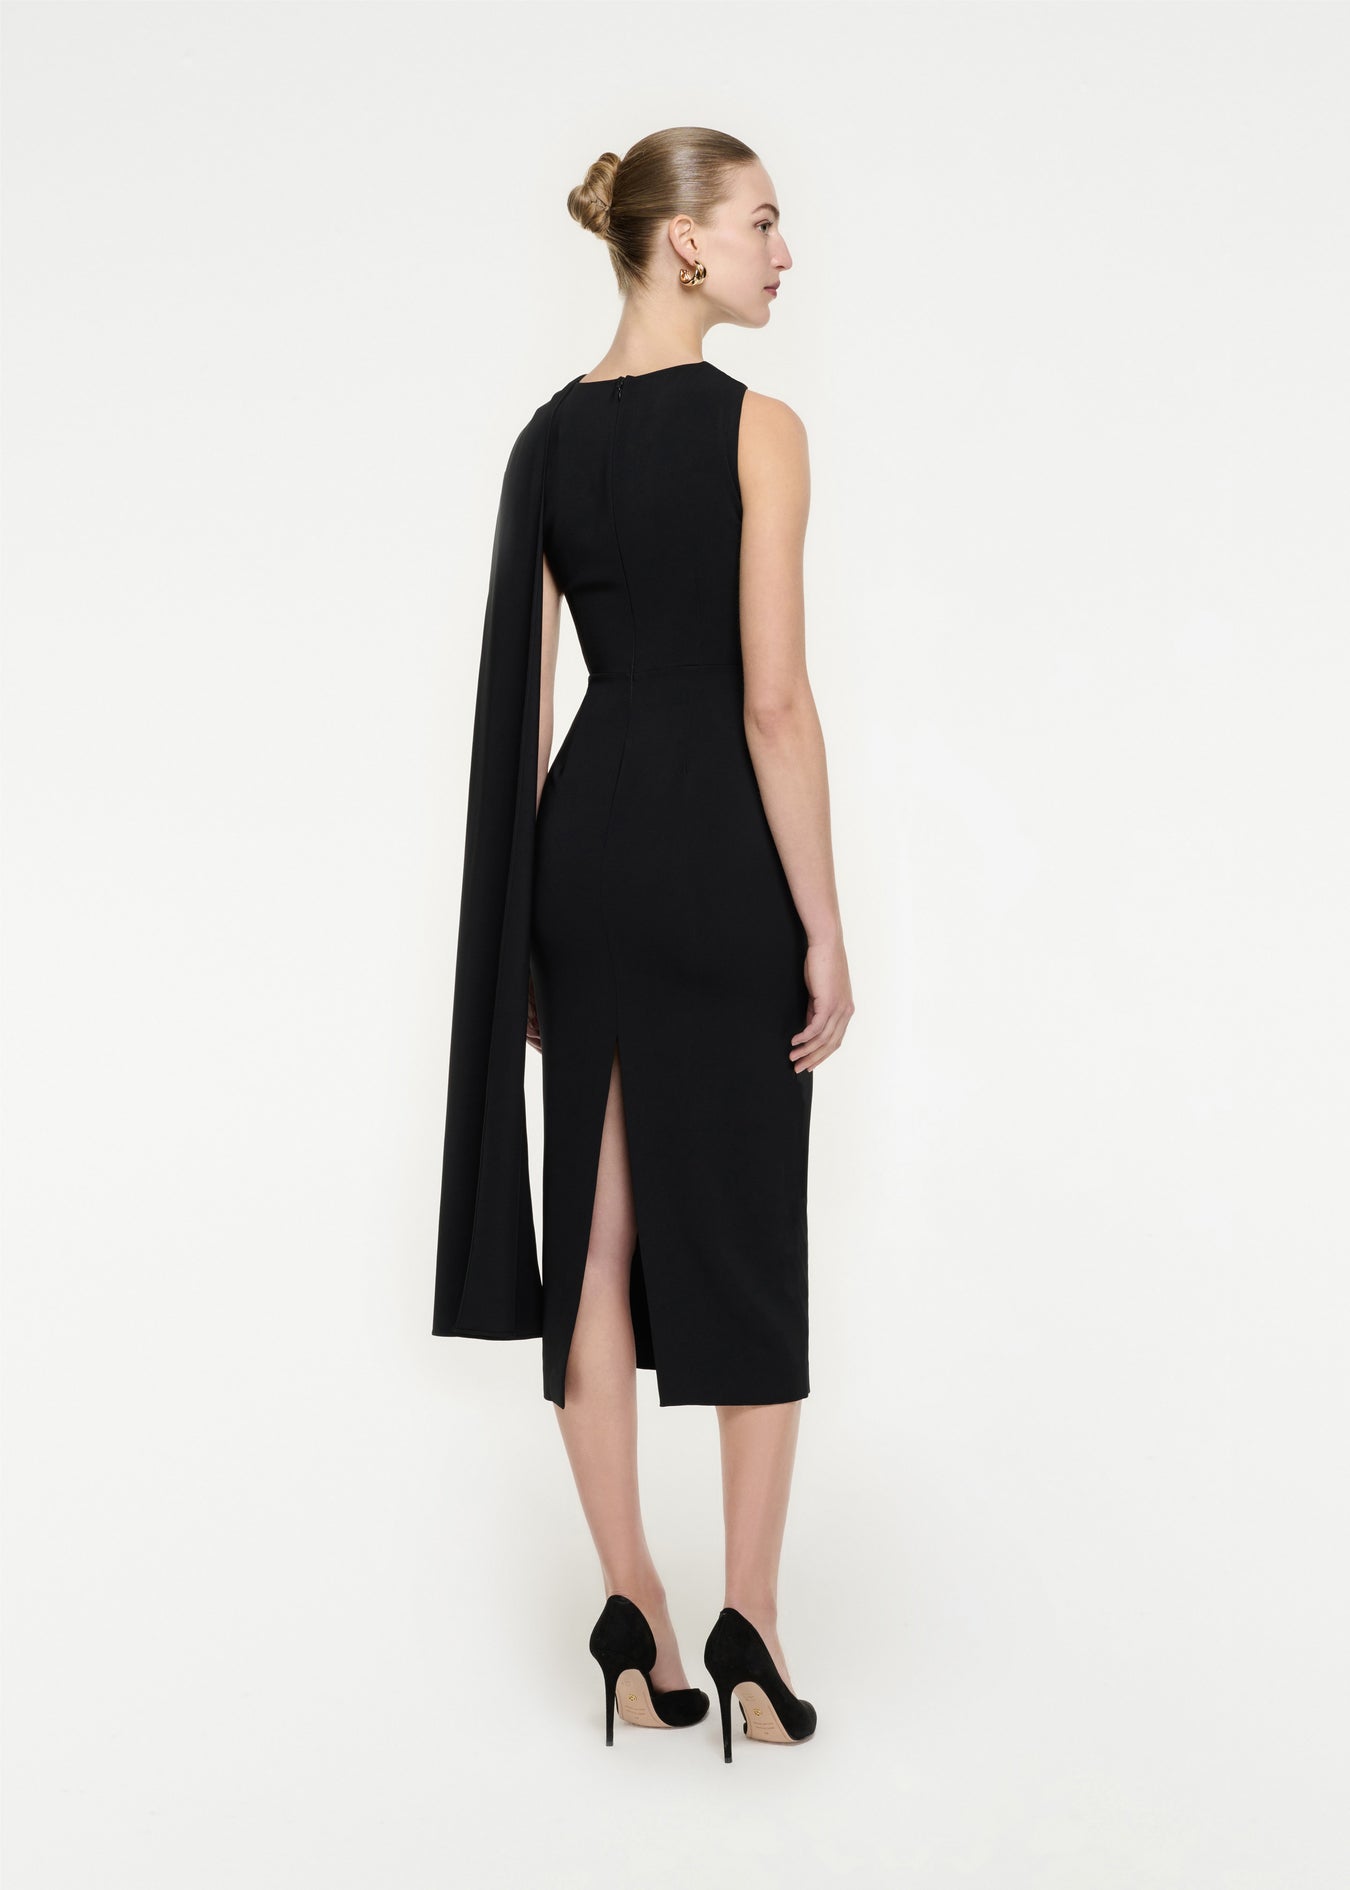 The back of a woman wearing the Asymmetric Stretch Cady Midi Dress in Black